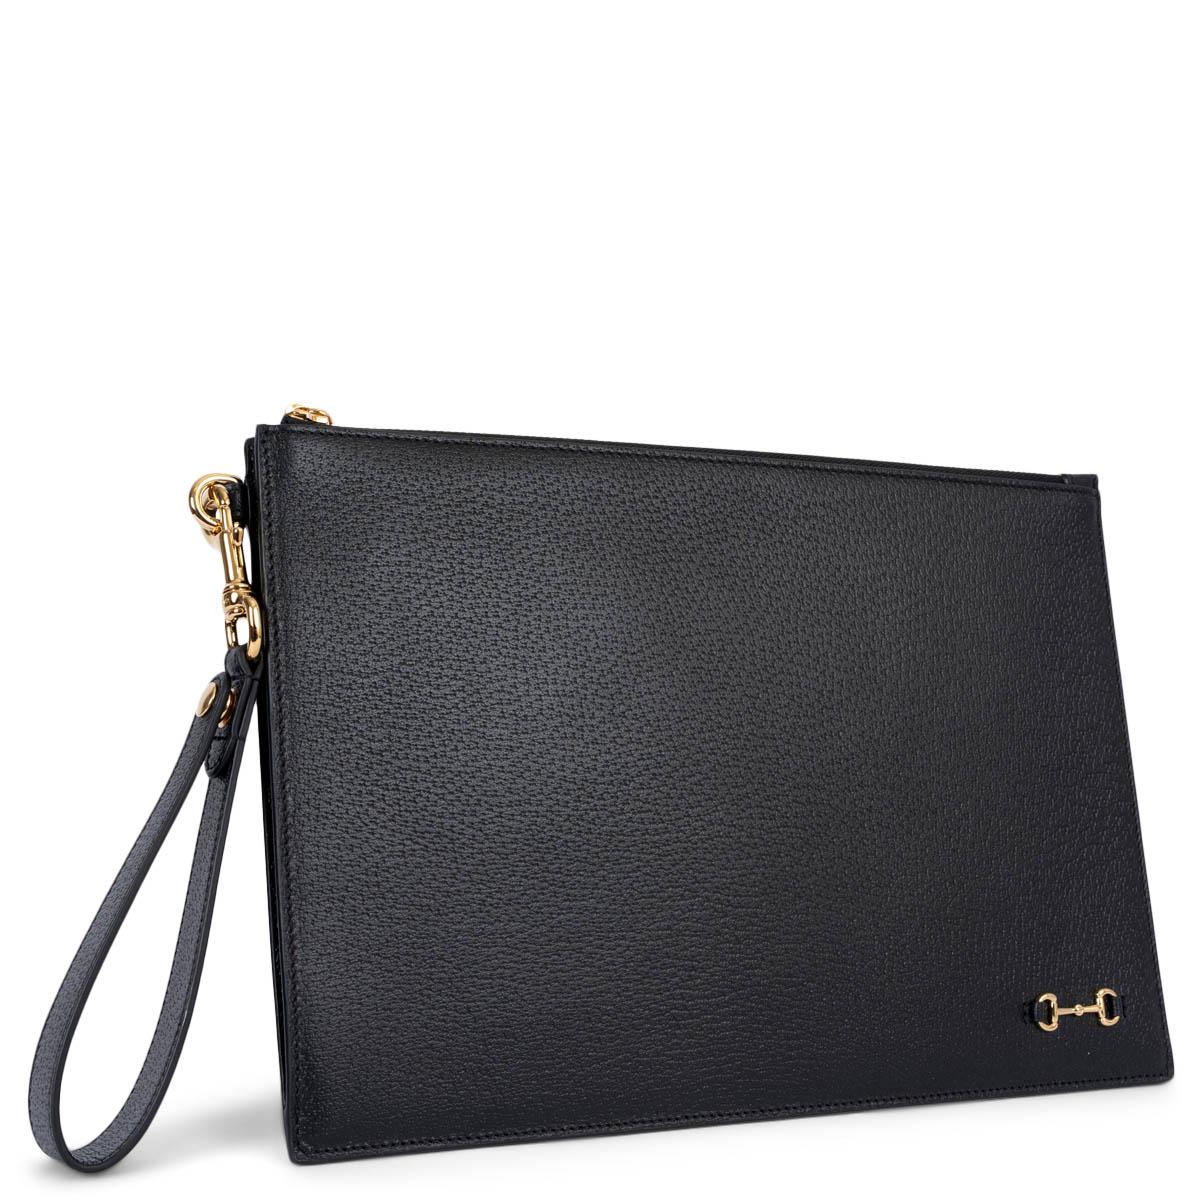 100% authentic Gucci 1955 Horsebit wristlet zip pouch in black pigskin featuring gold-tone hardware. The design comes with a zipper closure and is lined in black monogram canvas with two open pocket against the front and six credit card slots